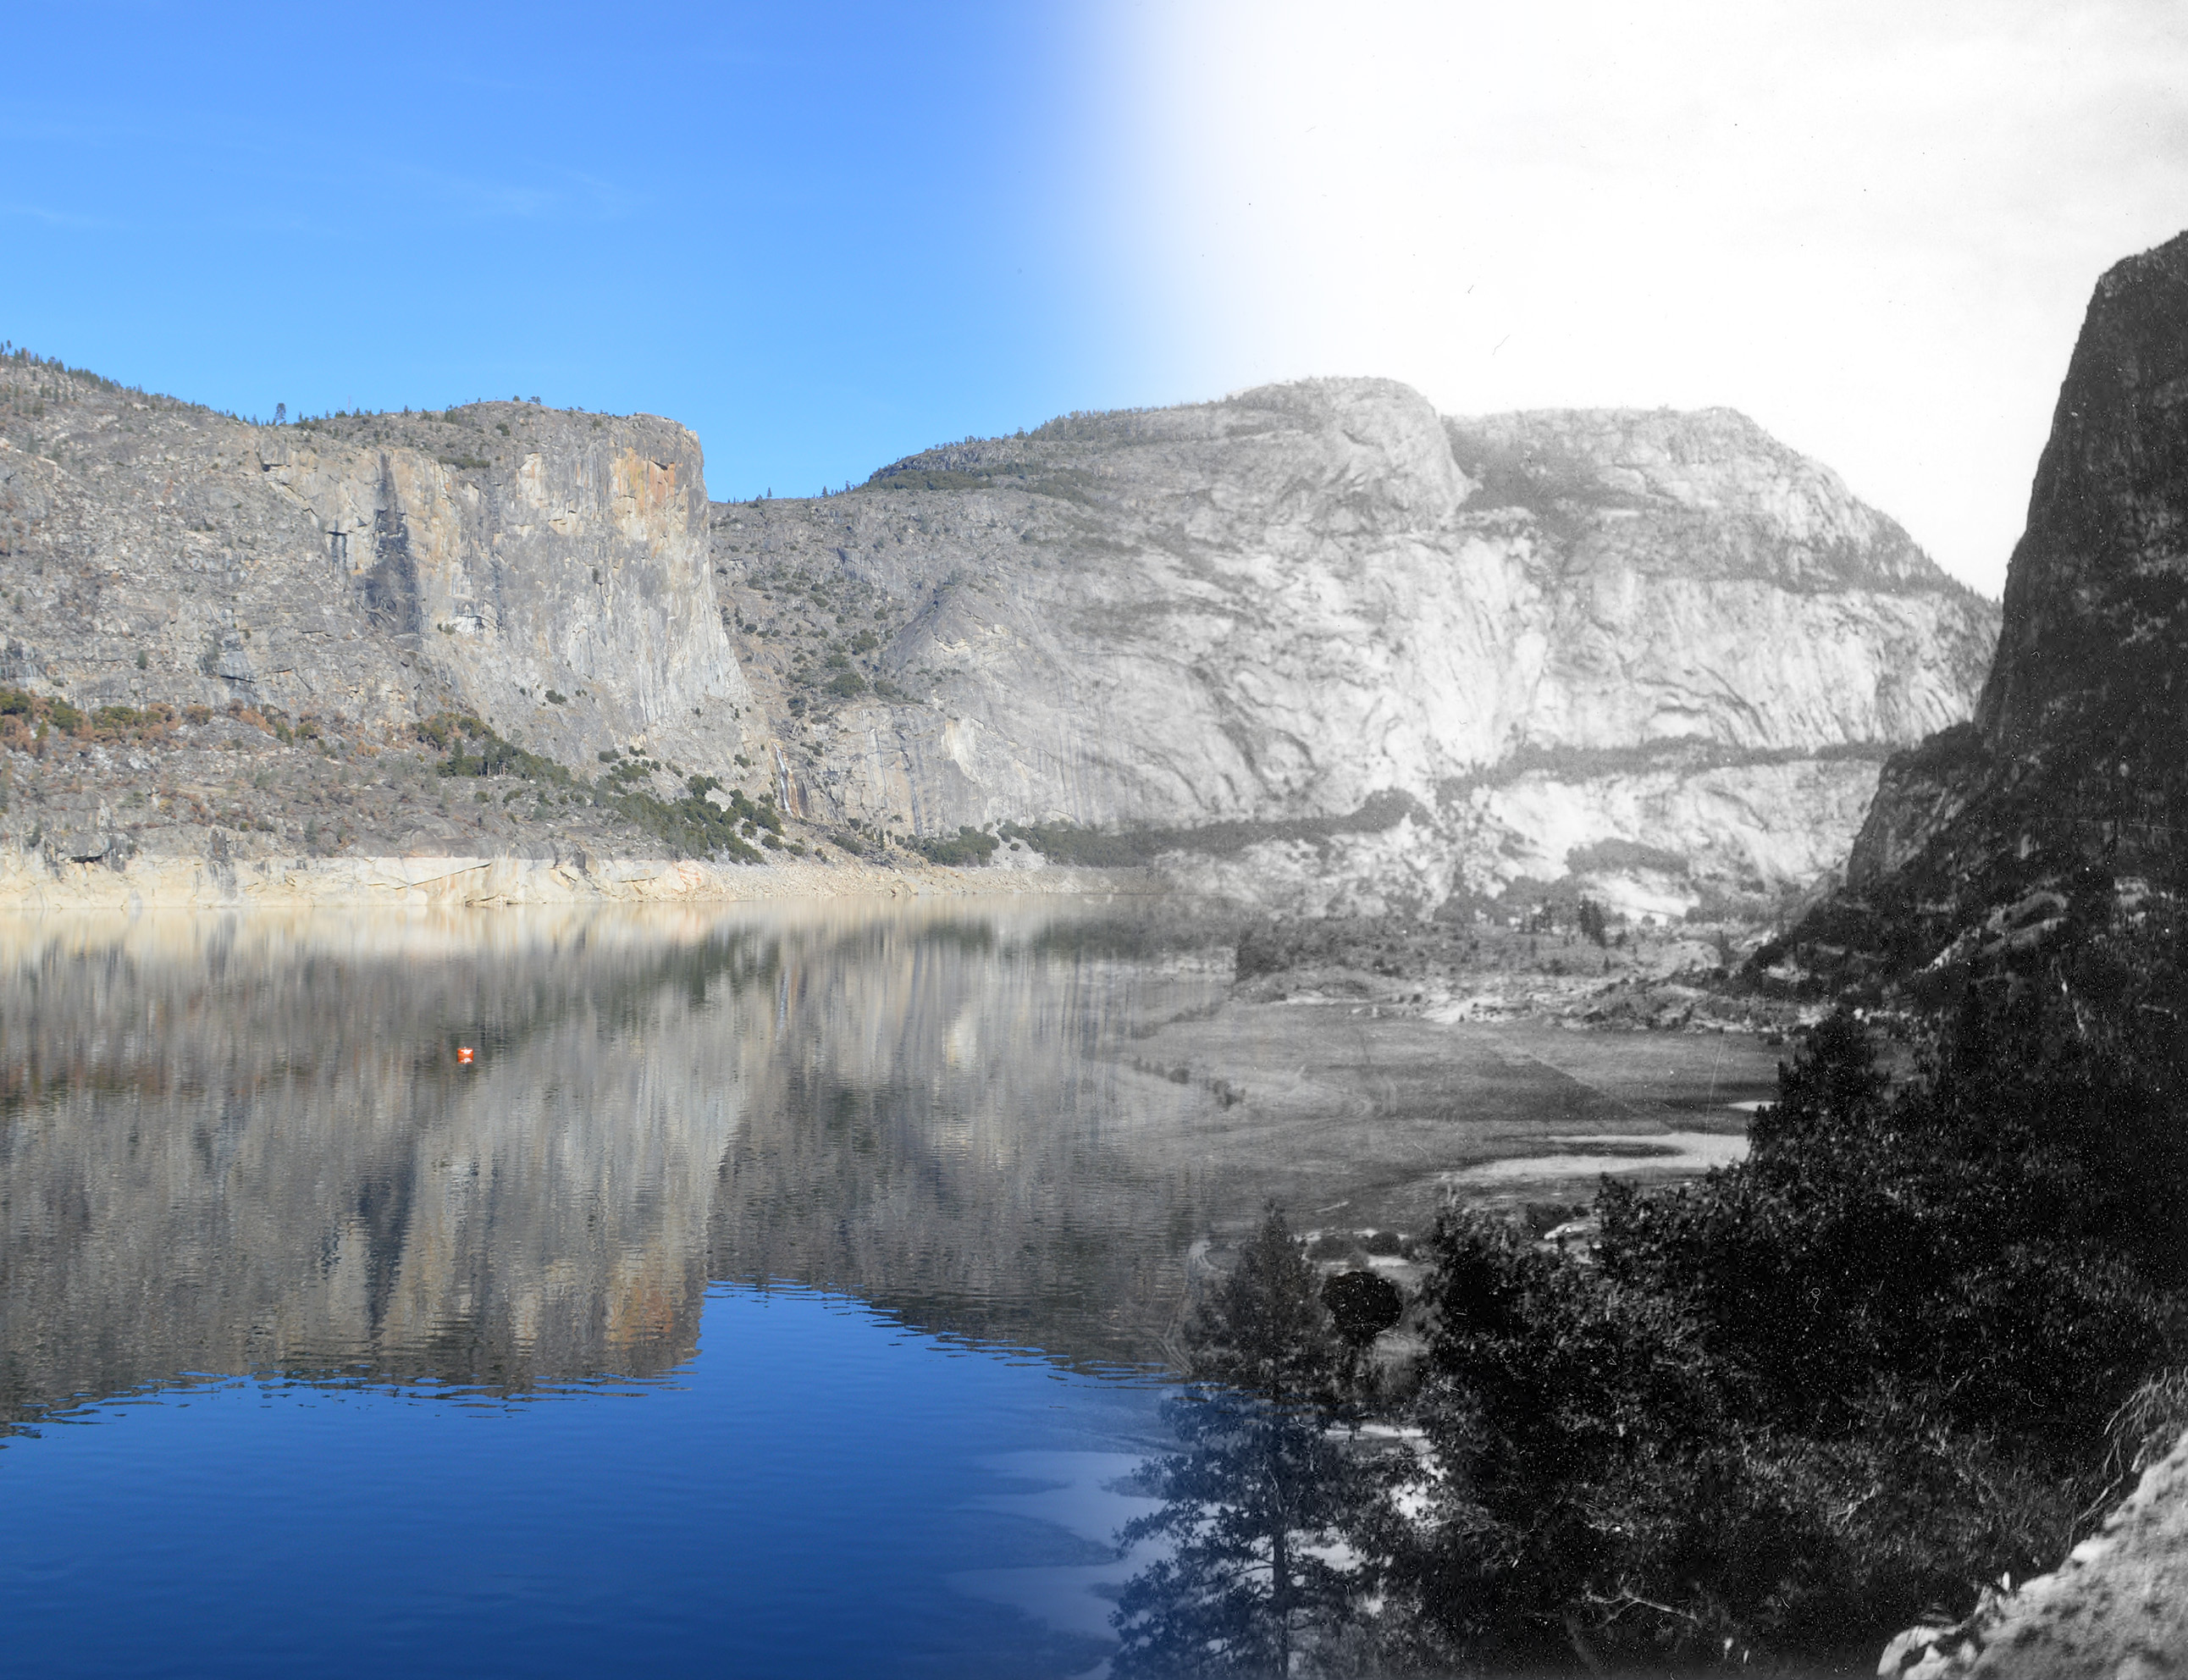 Hetch The Hetchy Valley before and after the construction of the dam